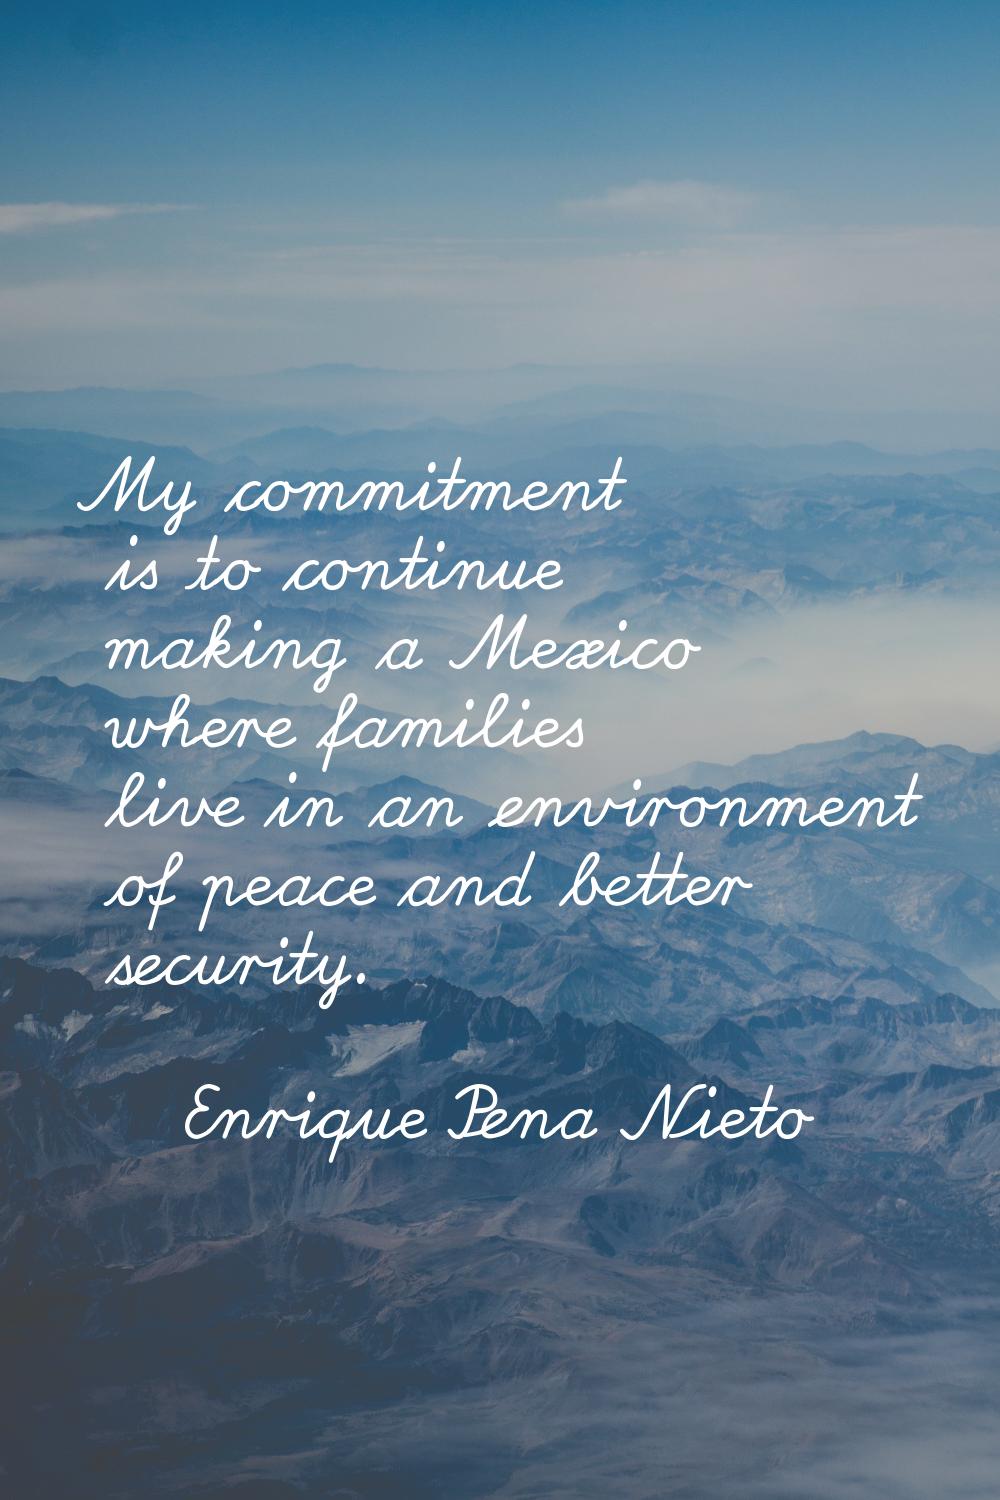 My commitment is to continue making a Mexico where families live in an environment of peace and bet